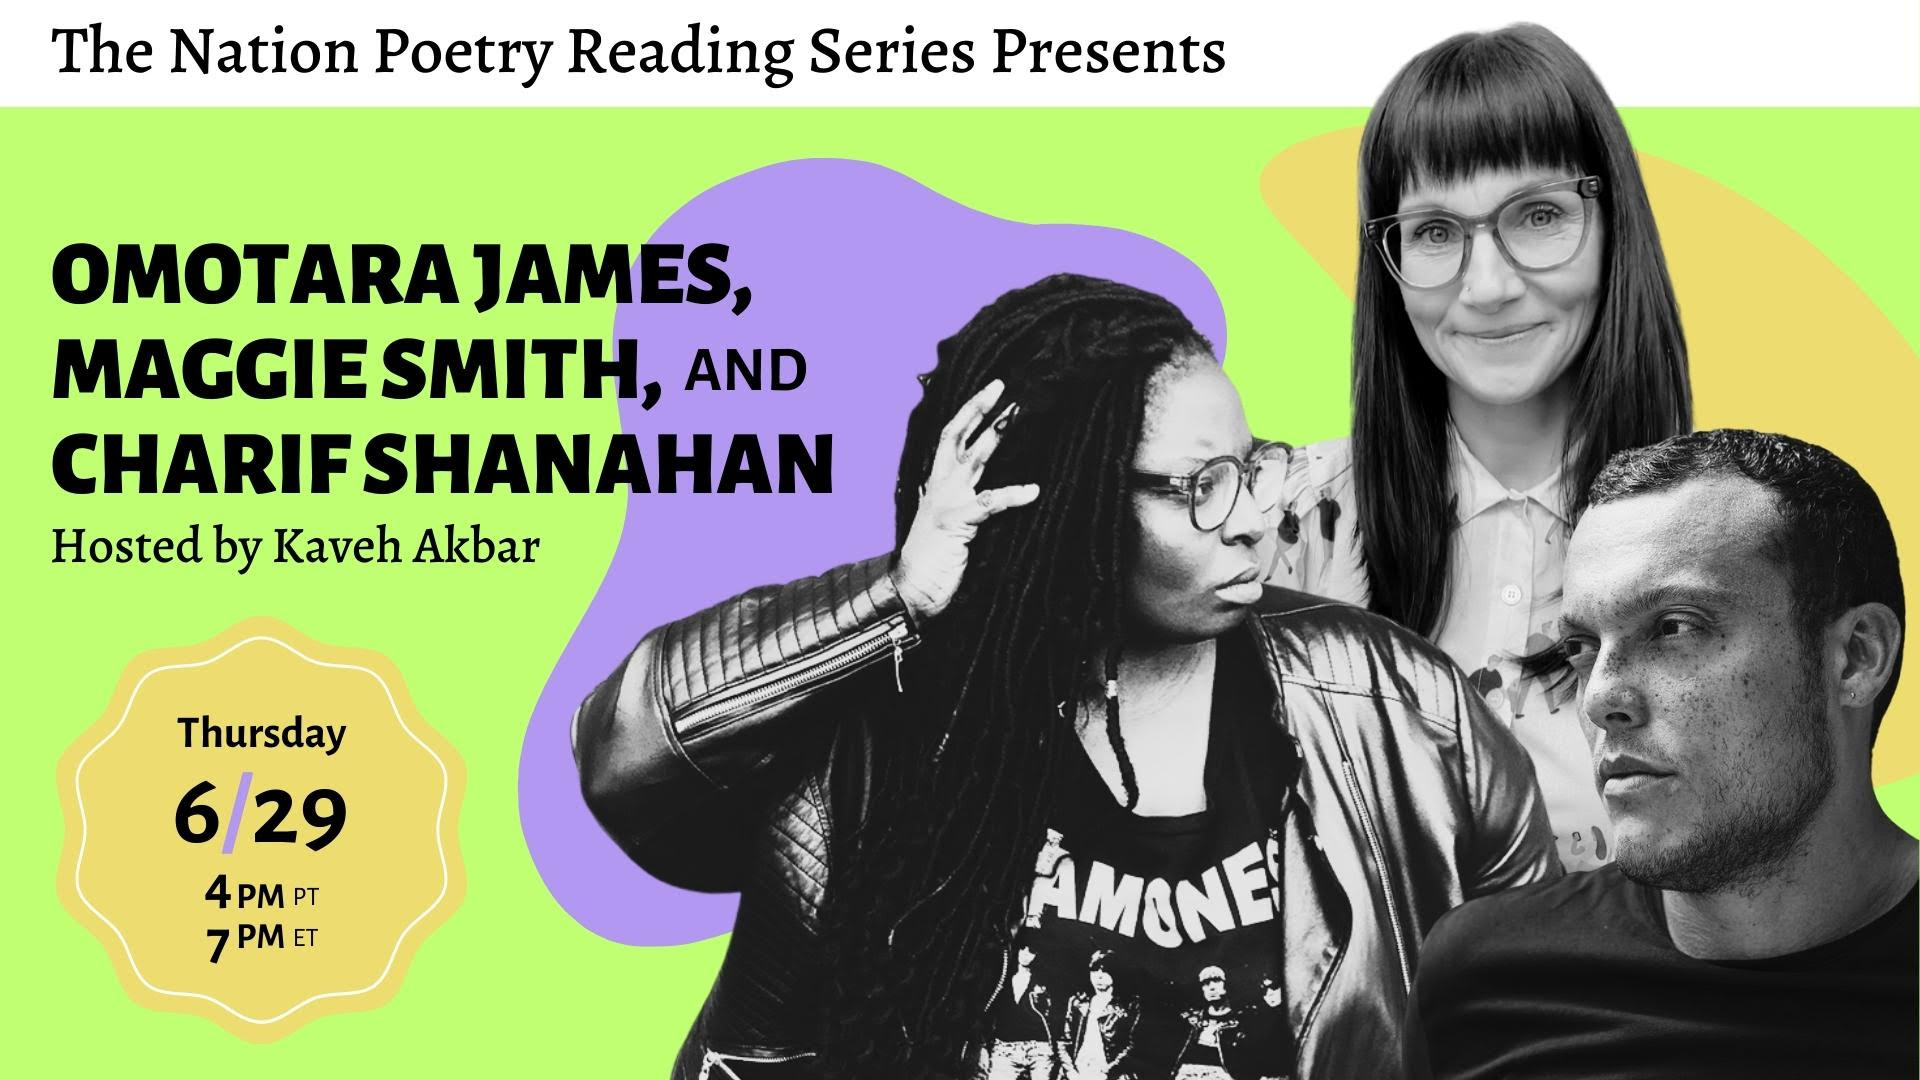 Image for The Nation Poetry Reading Series Presents: Maggie Smith, Charif Shanahan, and Omotara James